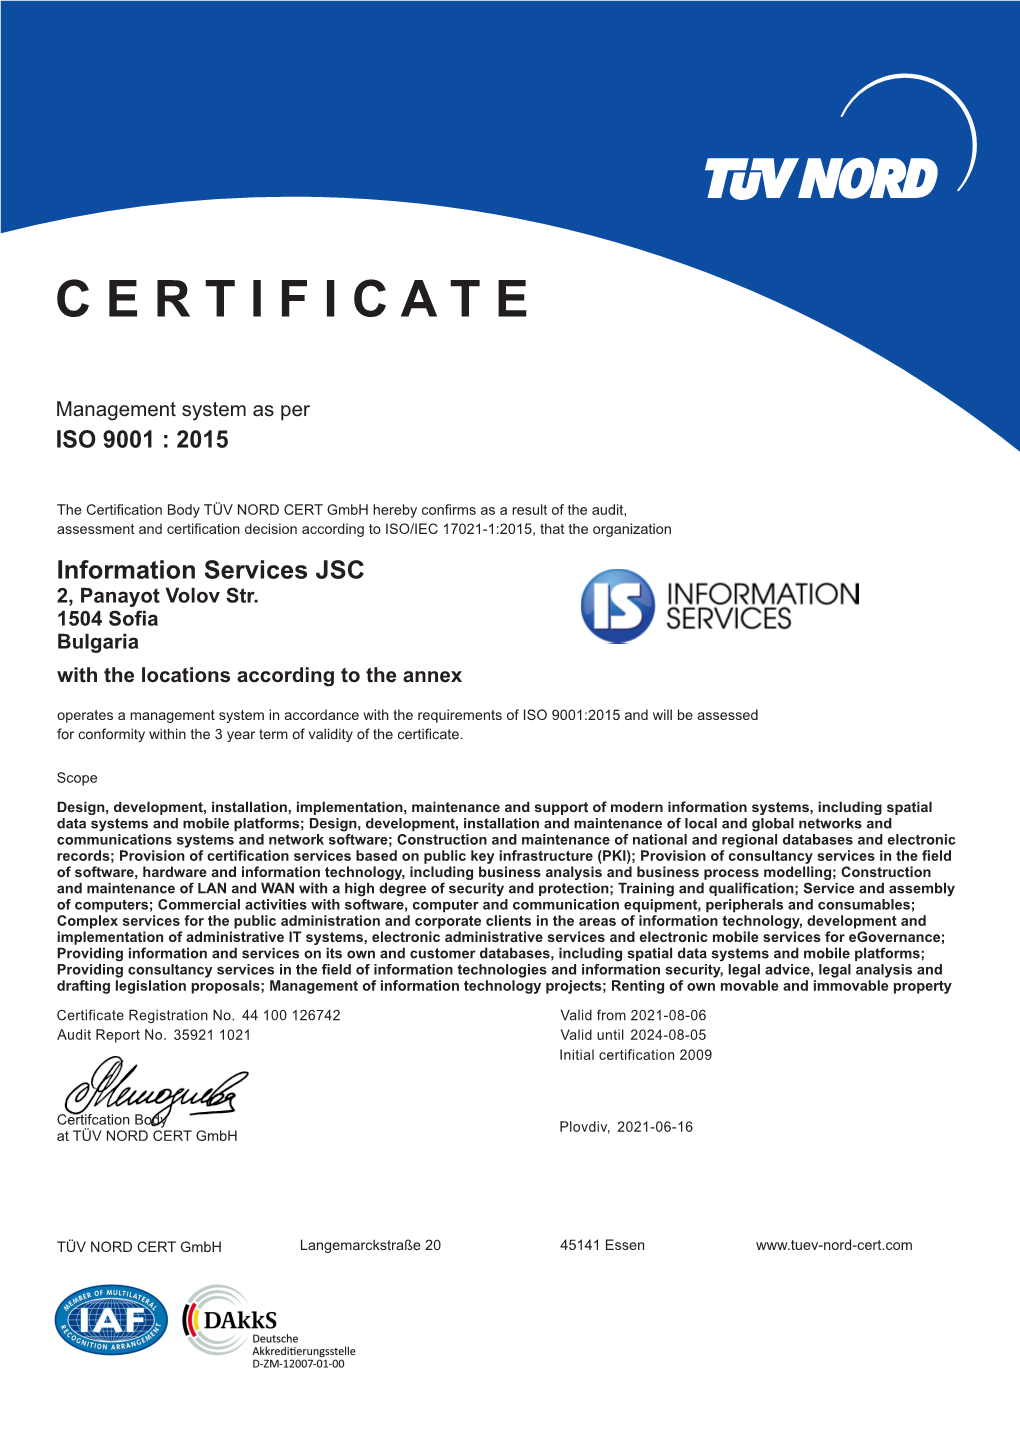 ISO 9001:2015 and Will Be Assessed for Conformity Within the 3 Year Term of Validity of the Certificate